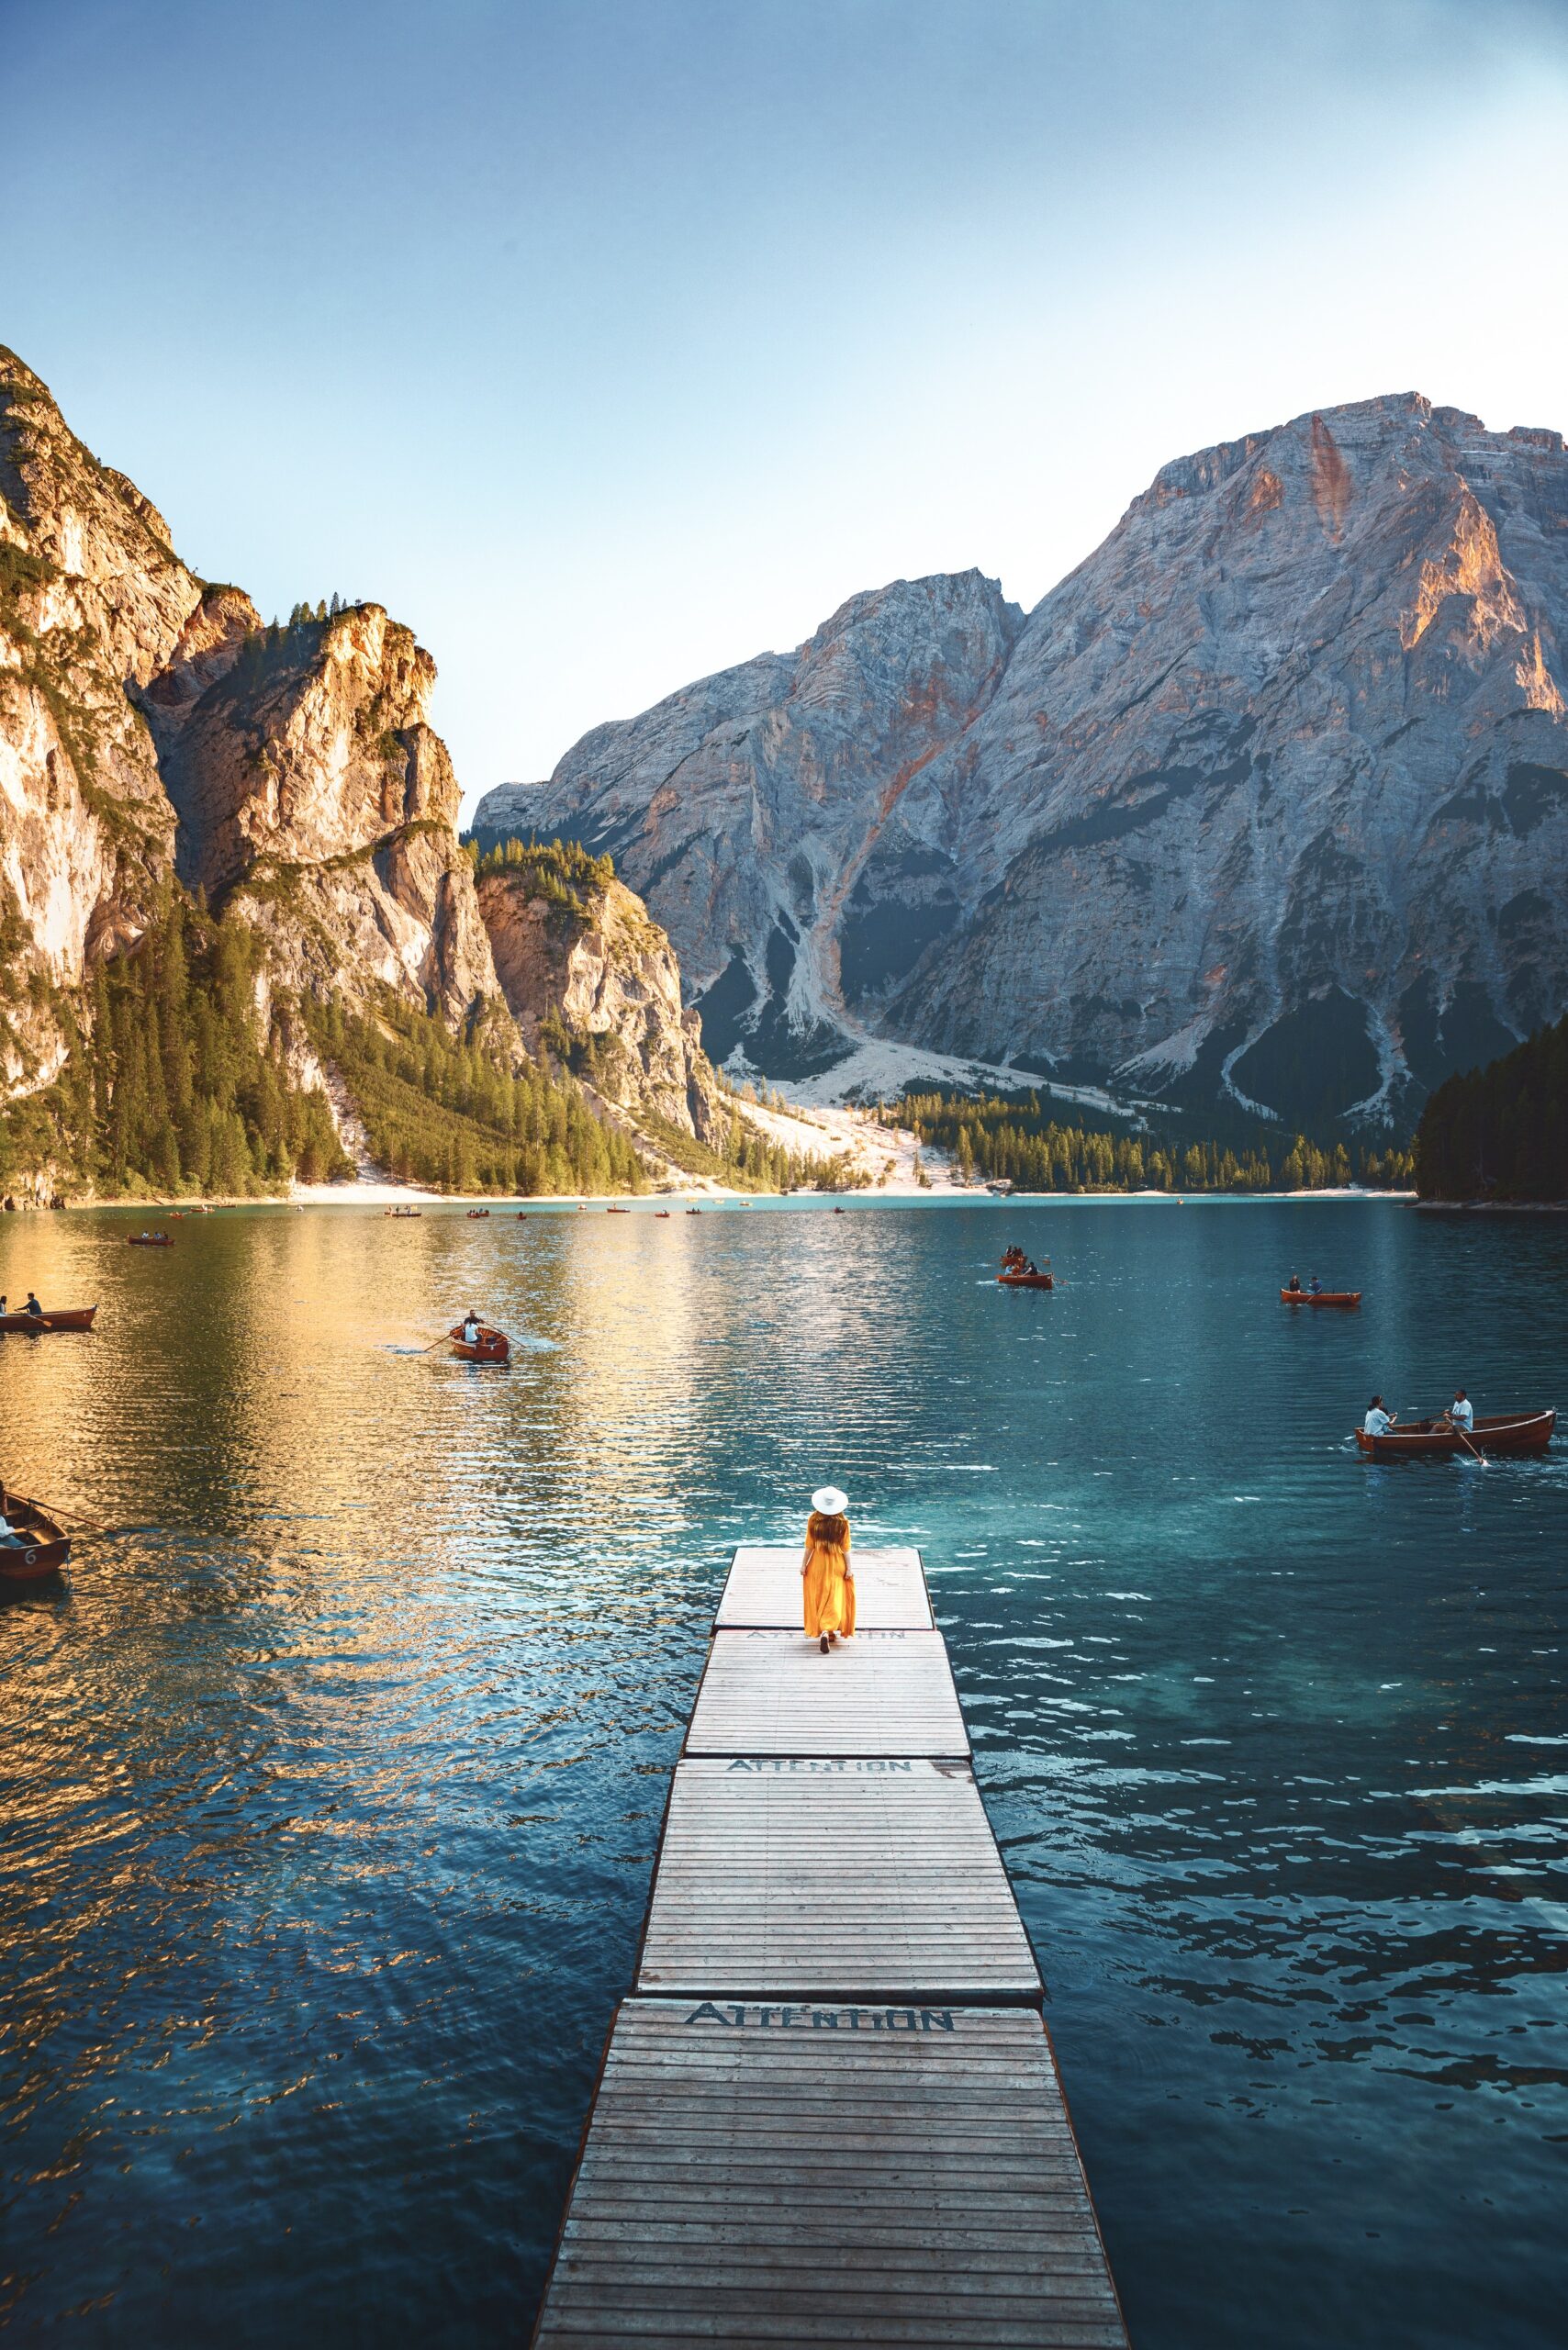 Woman in a yellow dress walking along a dock on a beautiful, blue lake nestled at the bottom of mountains in the Dolomites.